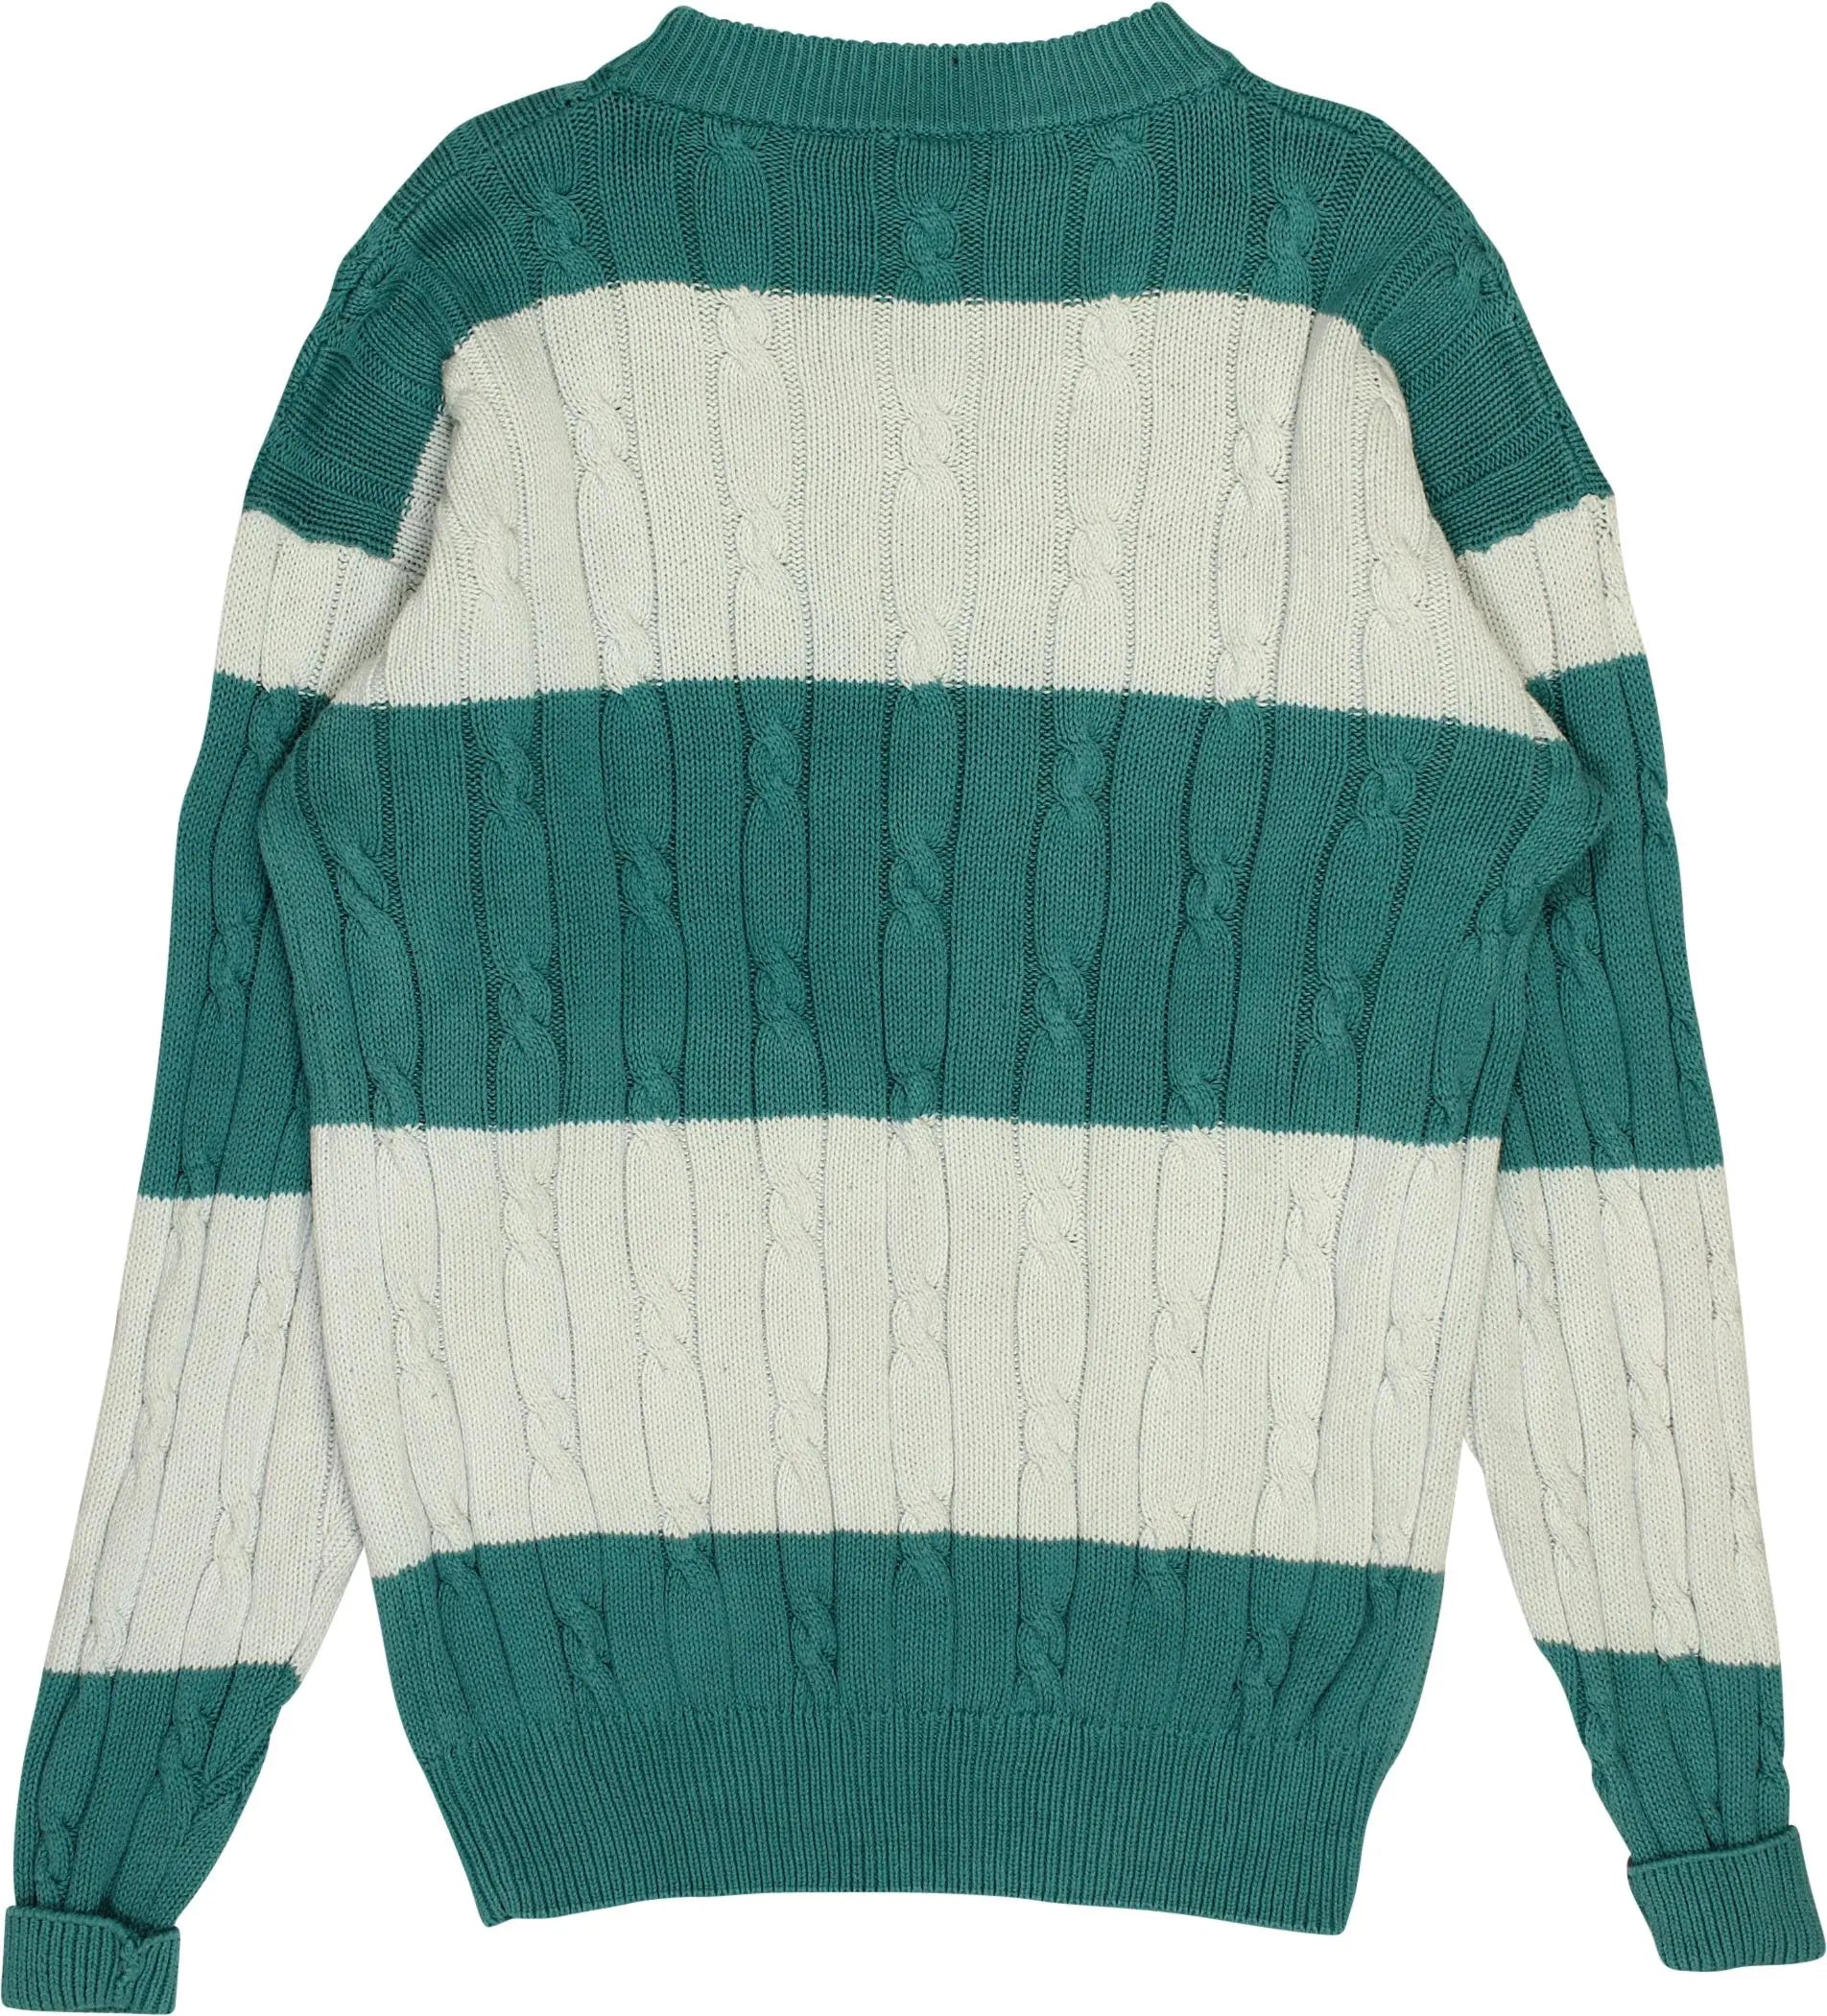 Unknown - Blue Striped Jumper- ThriftTale.com - Vintage and second handclothing